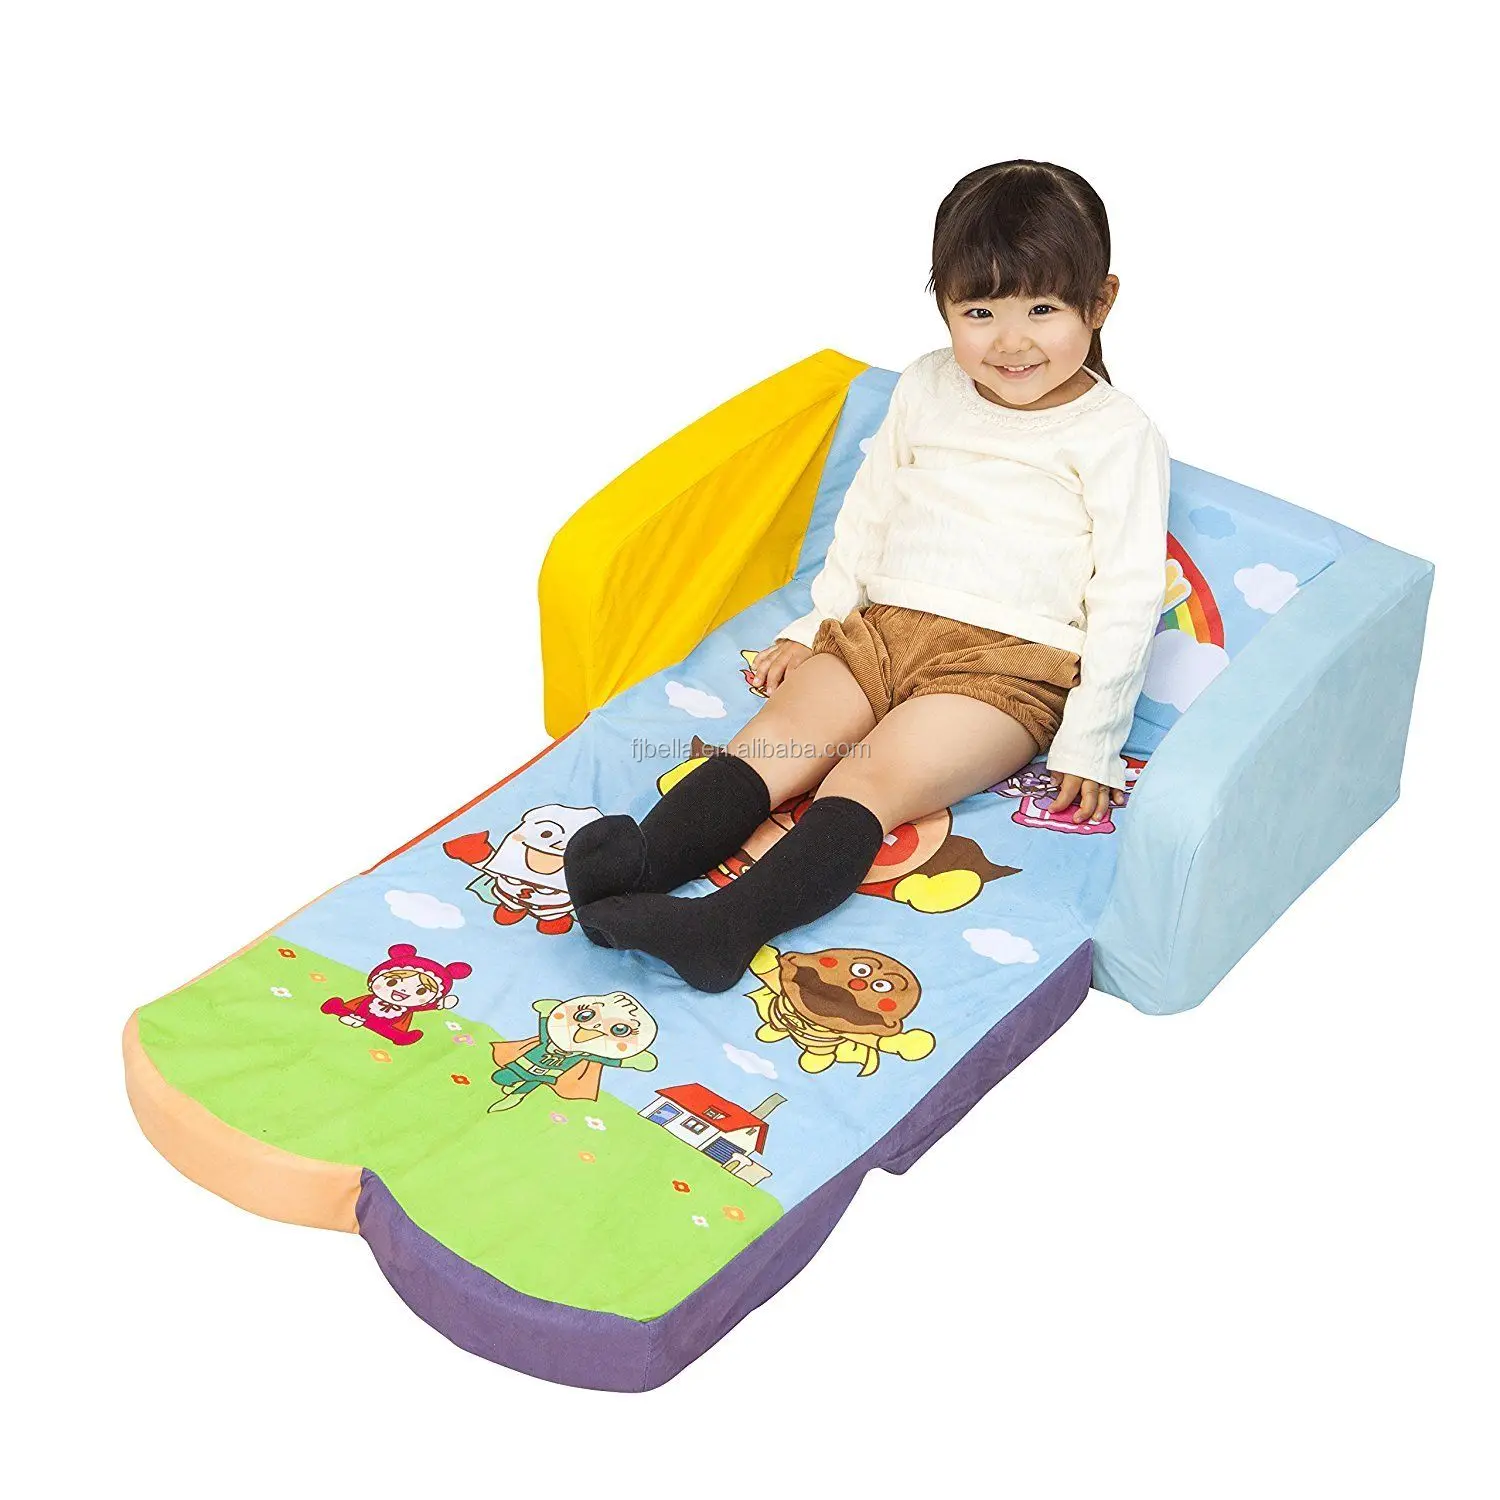 toddler soft chair